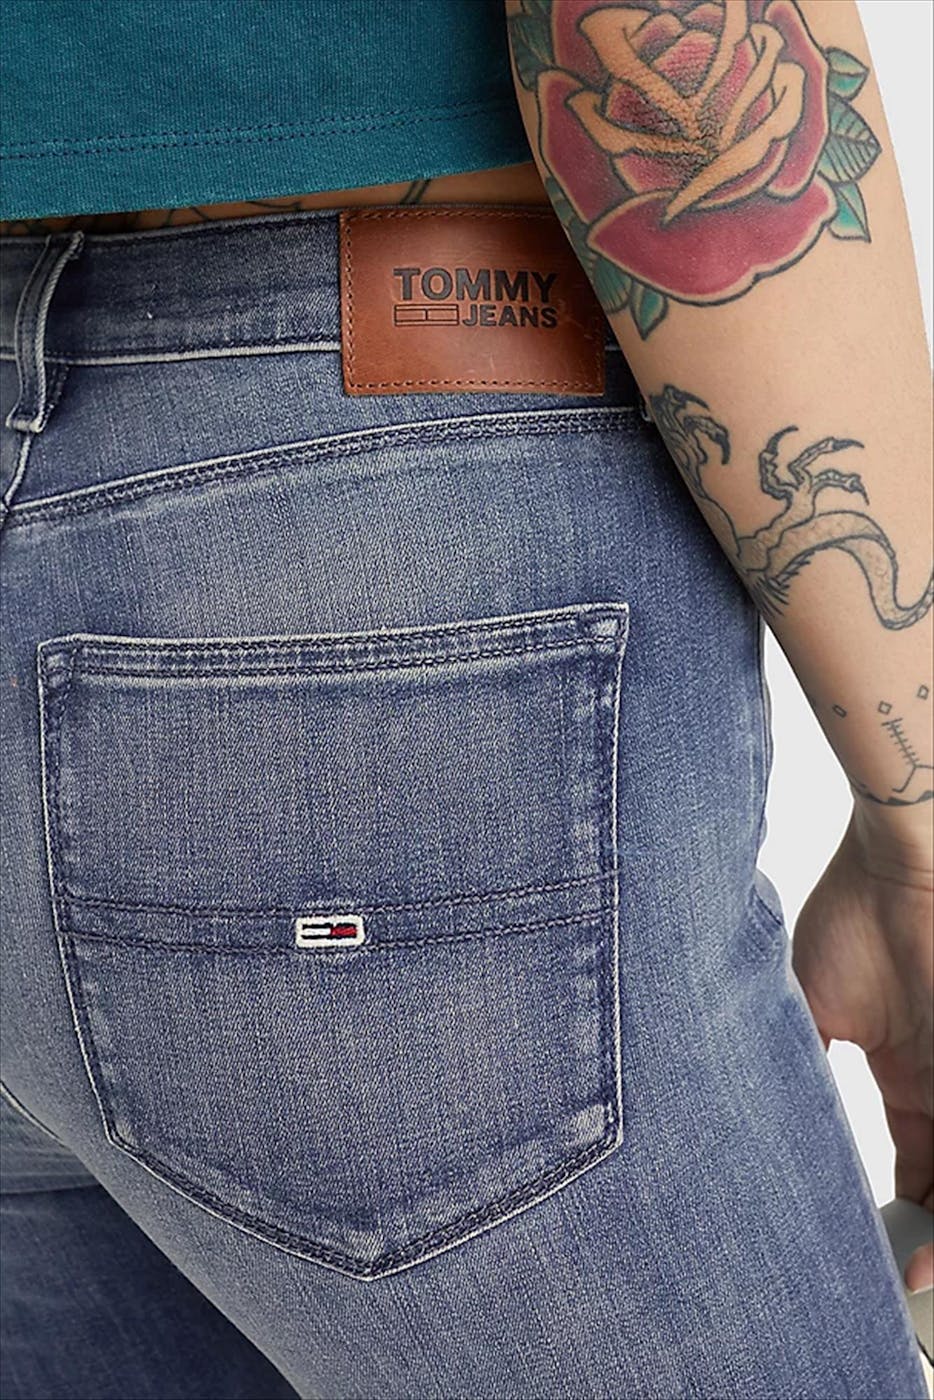 Tommy Jeans - Blauwe Sylvia Super Skinny jeans